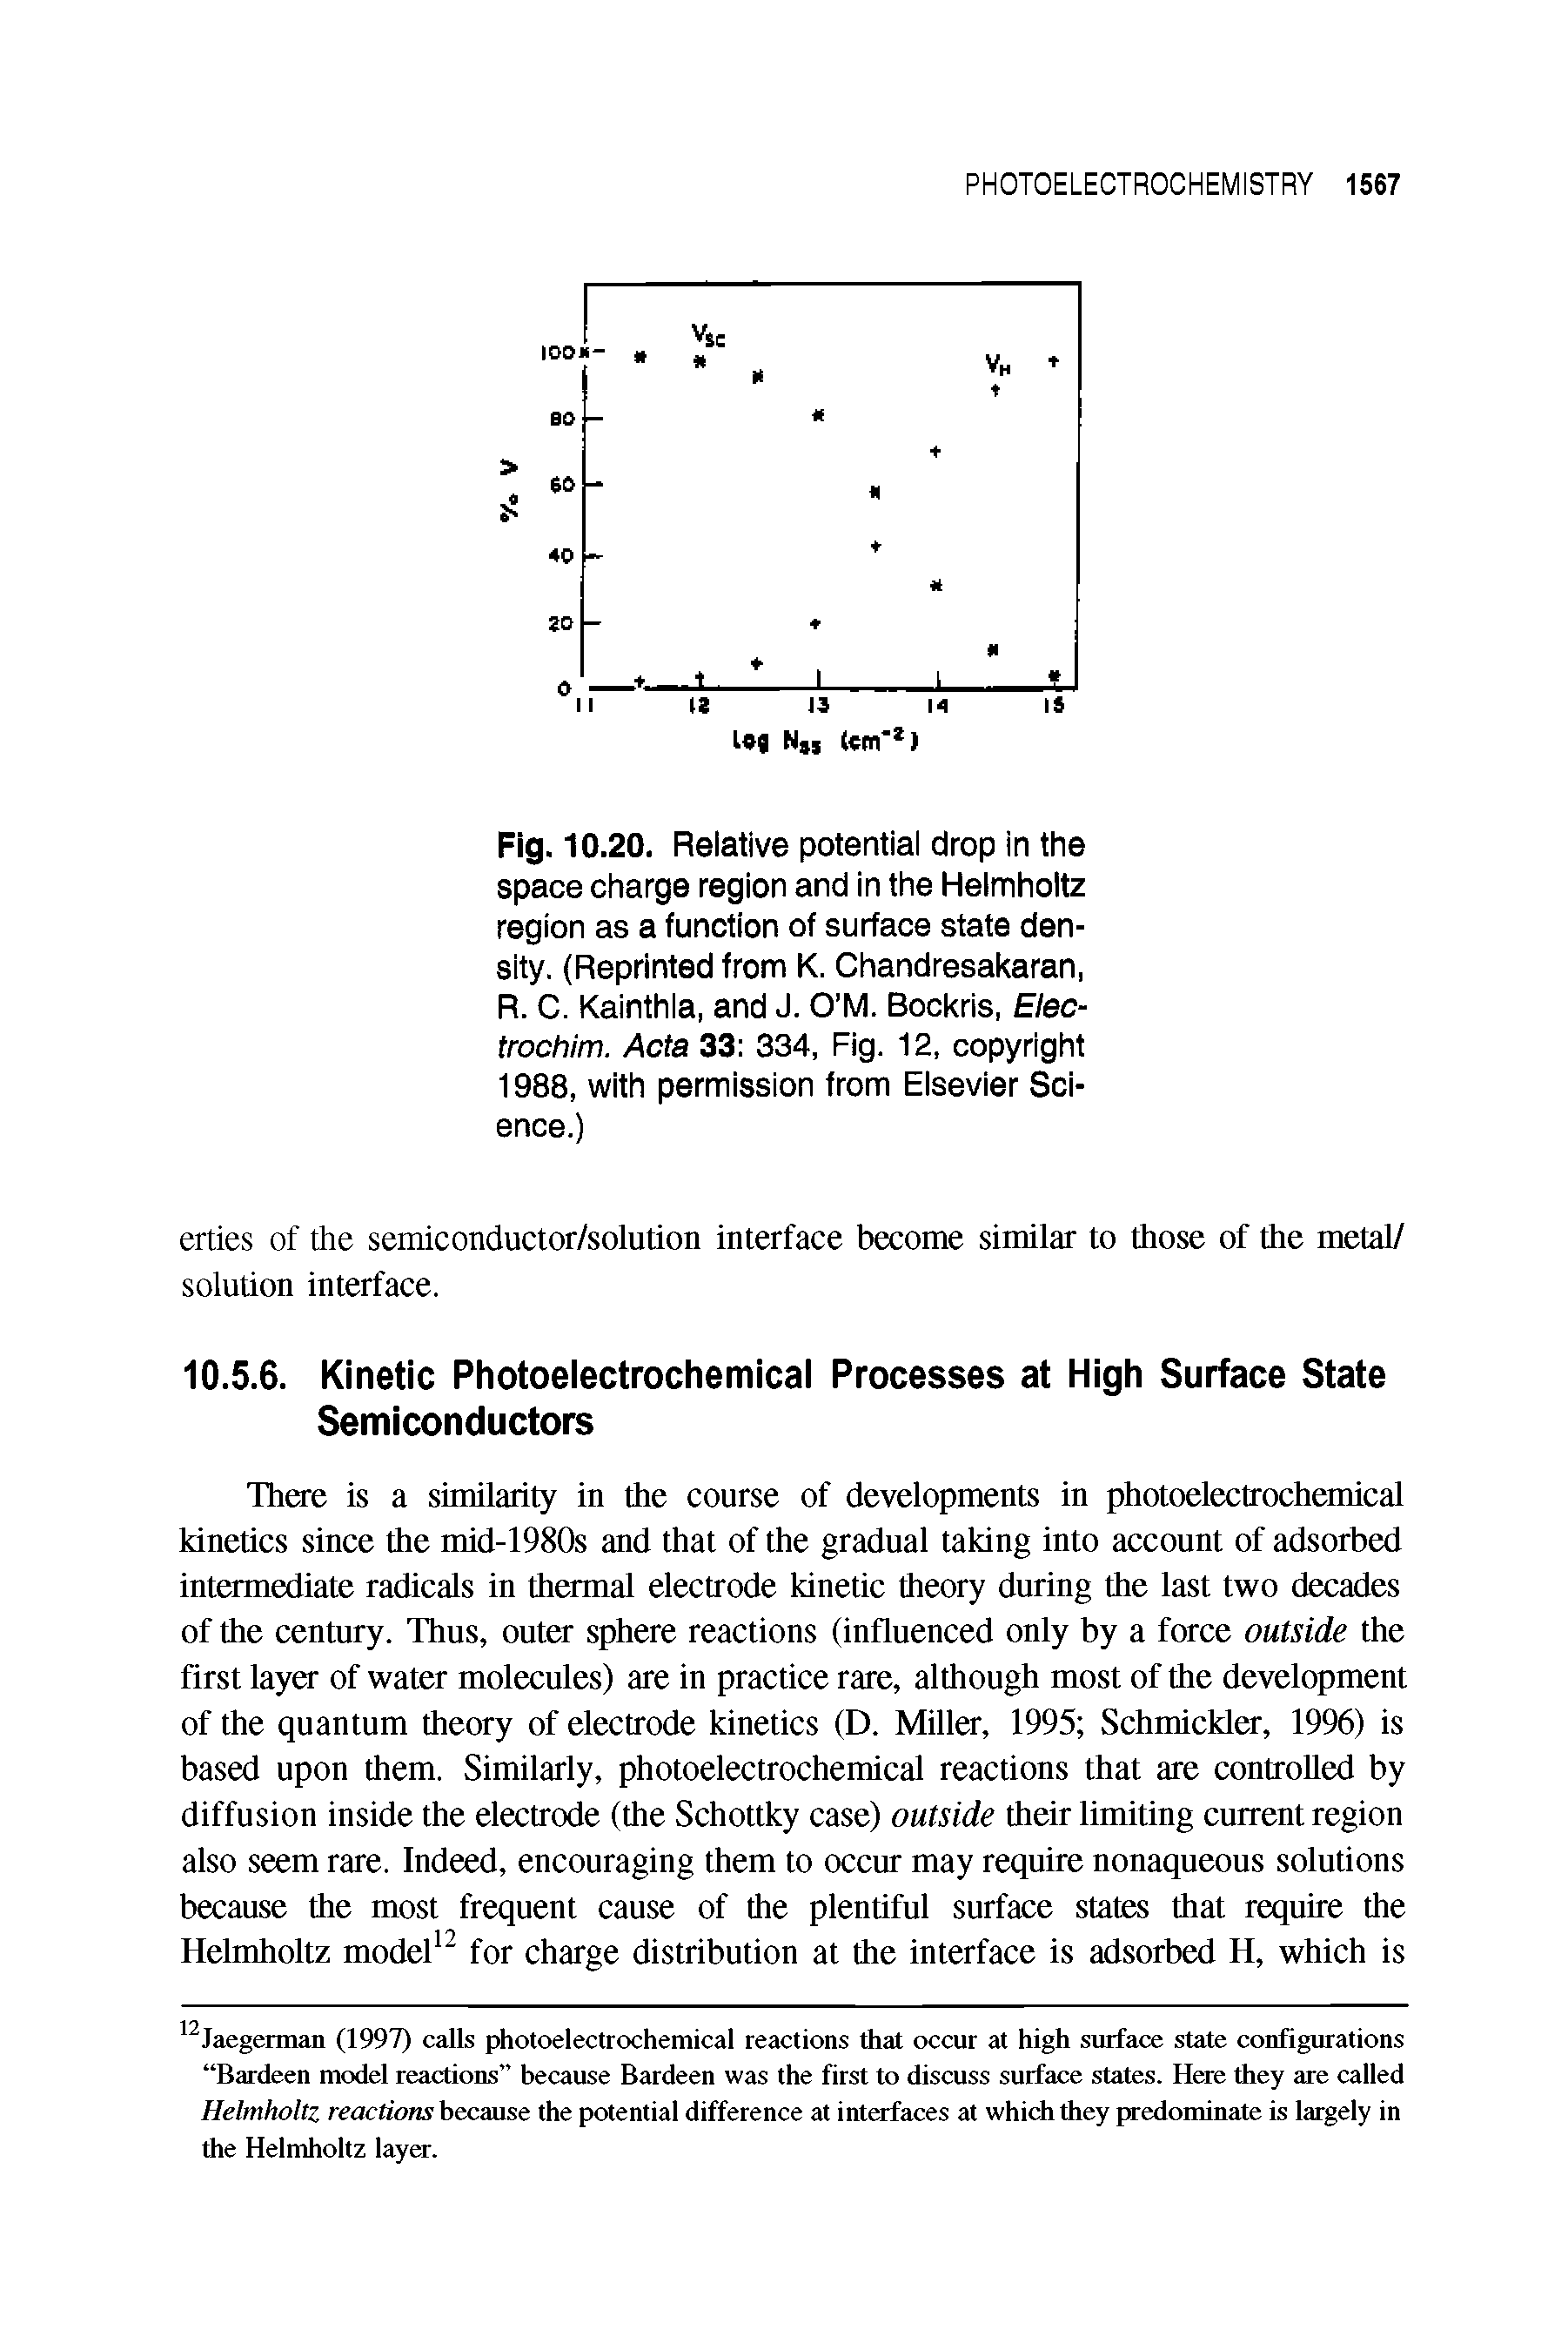 Fig. 10.20. Relative potential drop in the space charge region and in the Helmholtz region as a function of surface state density. (Reprinted from K. Chandresakaran, R. C. Kainthla, and J. O M. Bockris, Elec-trochim. Acta 33 334, Fig. 12, copyright 1988, with permission from Elsevier Science.)...